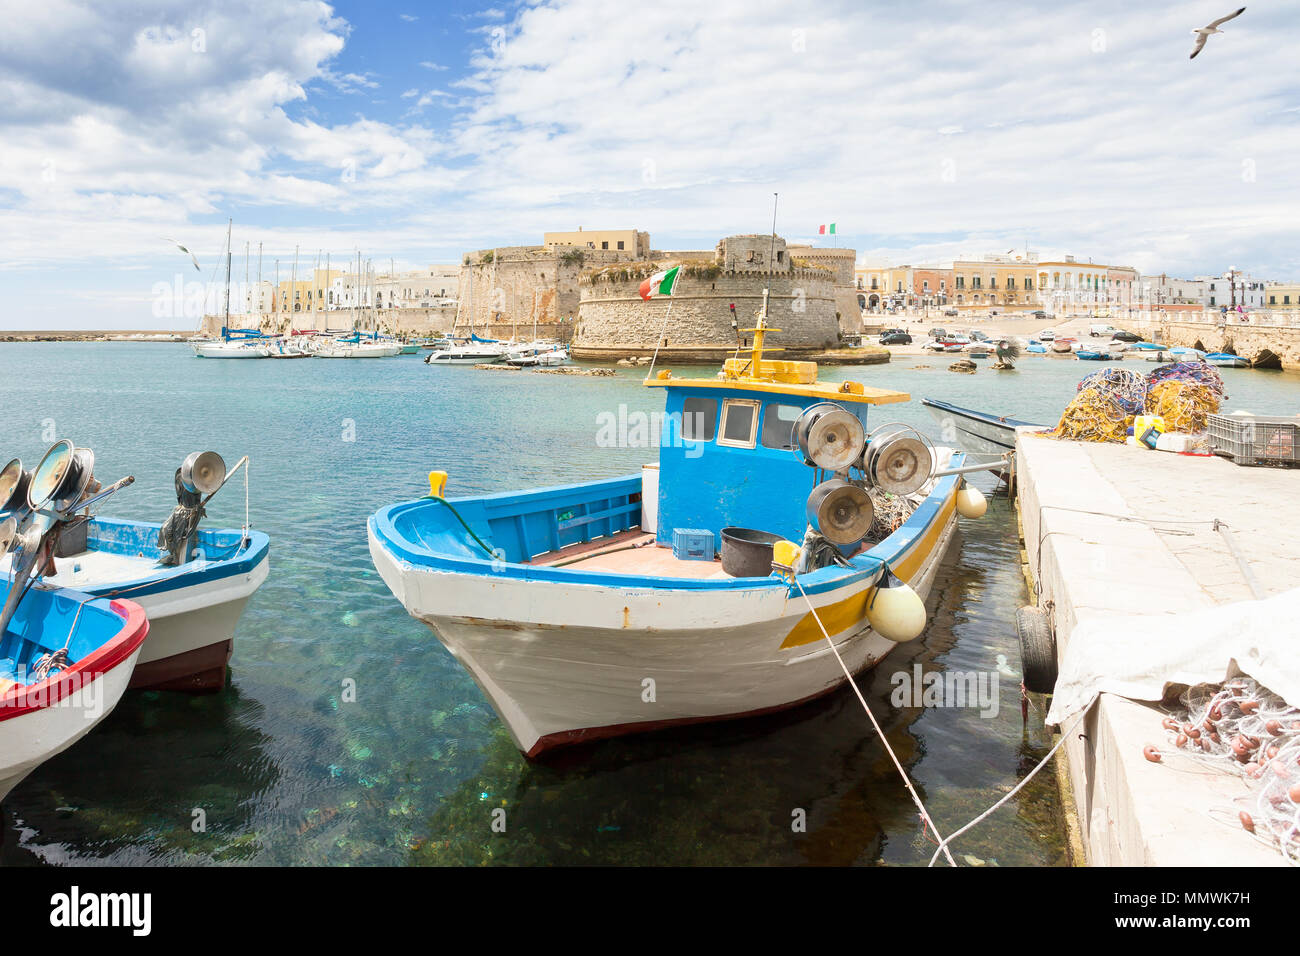 Gallipoli, Apulia, Italy - Fishing boat at the seaport in front of the town wall Stock Photo